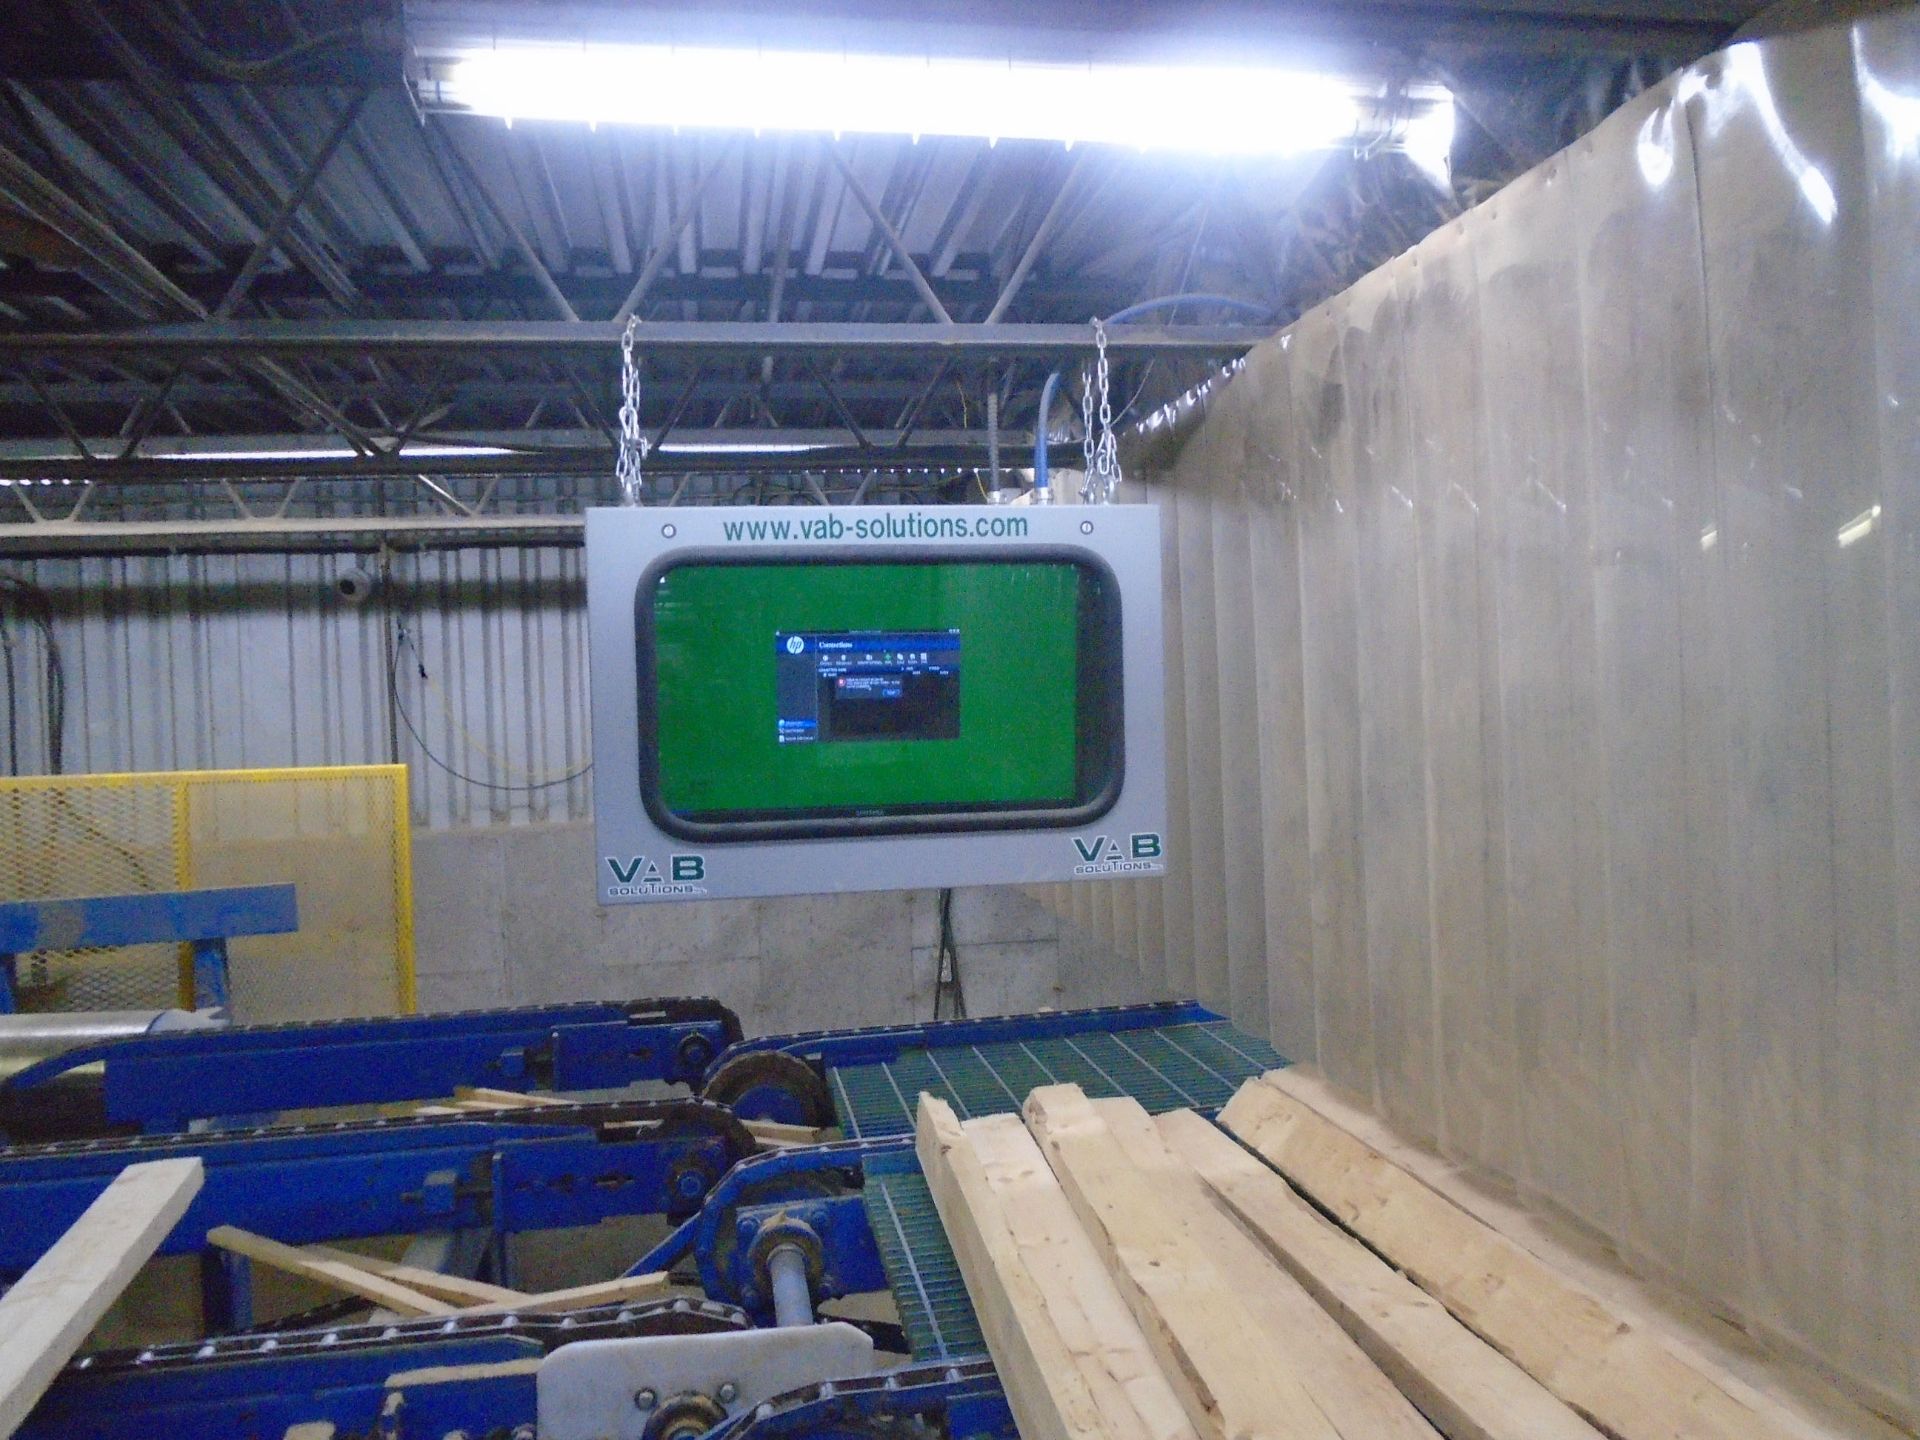 VAB SOLUTIONS (2015) LINEAR LUMBER GRADING SYSTEM WITH NORDSON 25B UV MARKING/READING UNIT, NEMA - Image 5 of 17